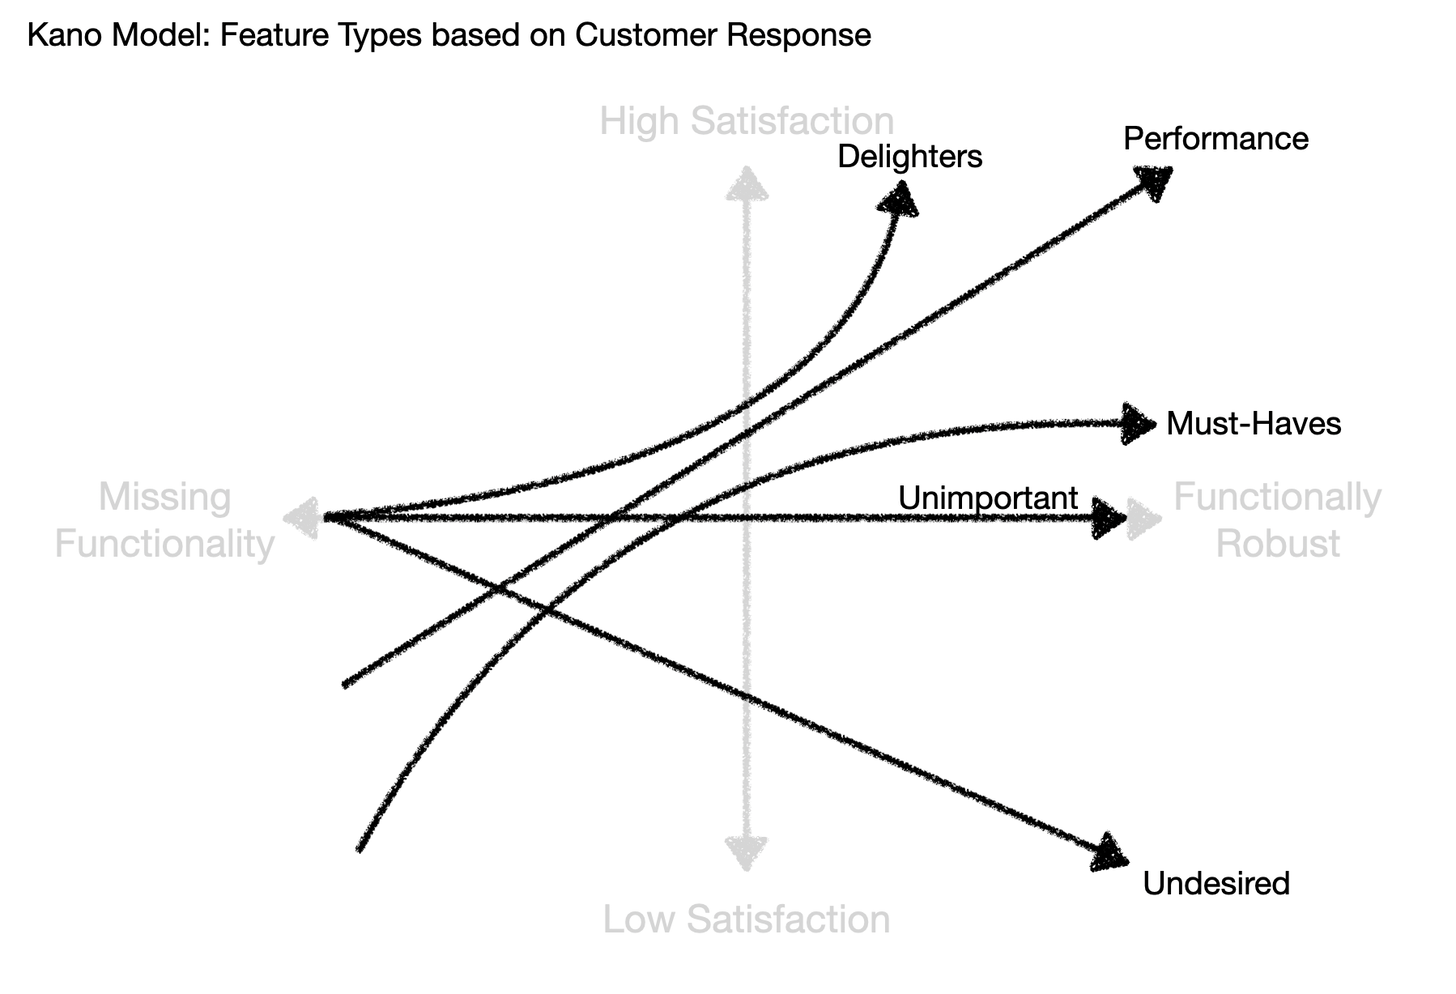 Kano Model and Execution Priorities